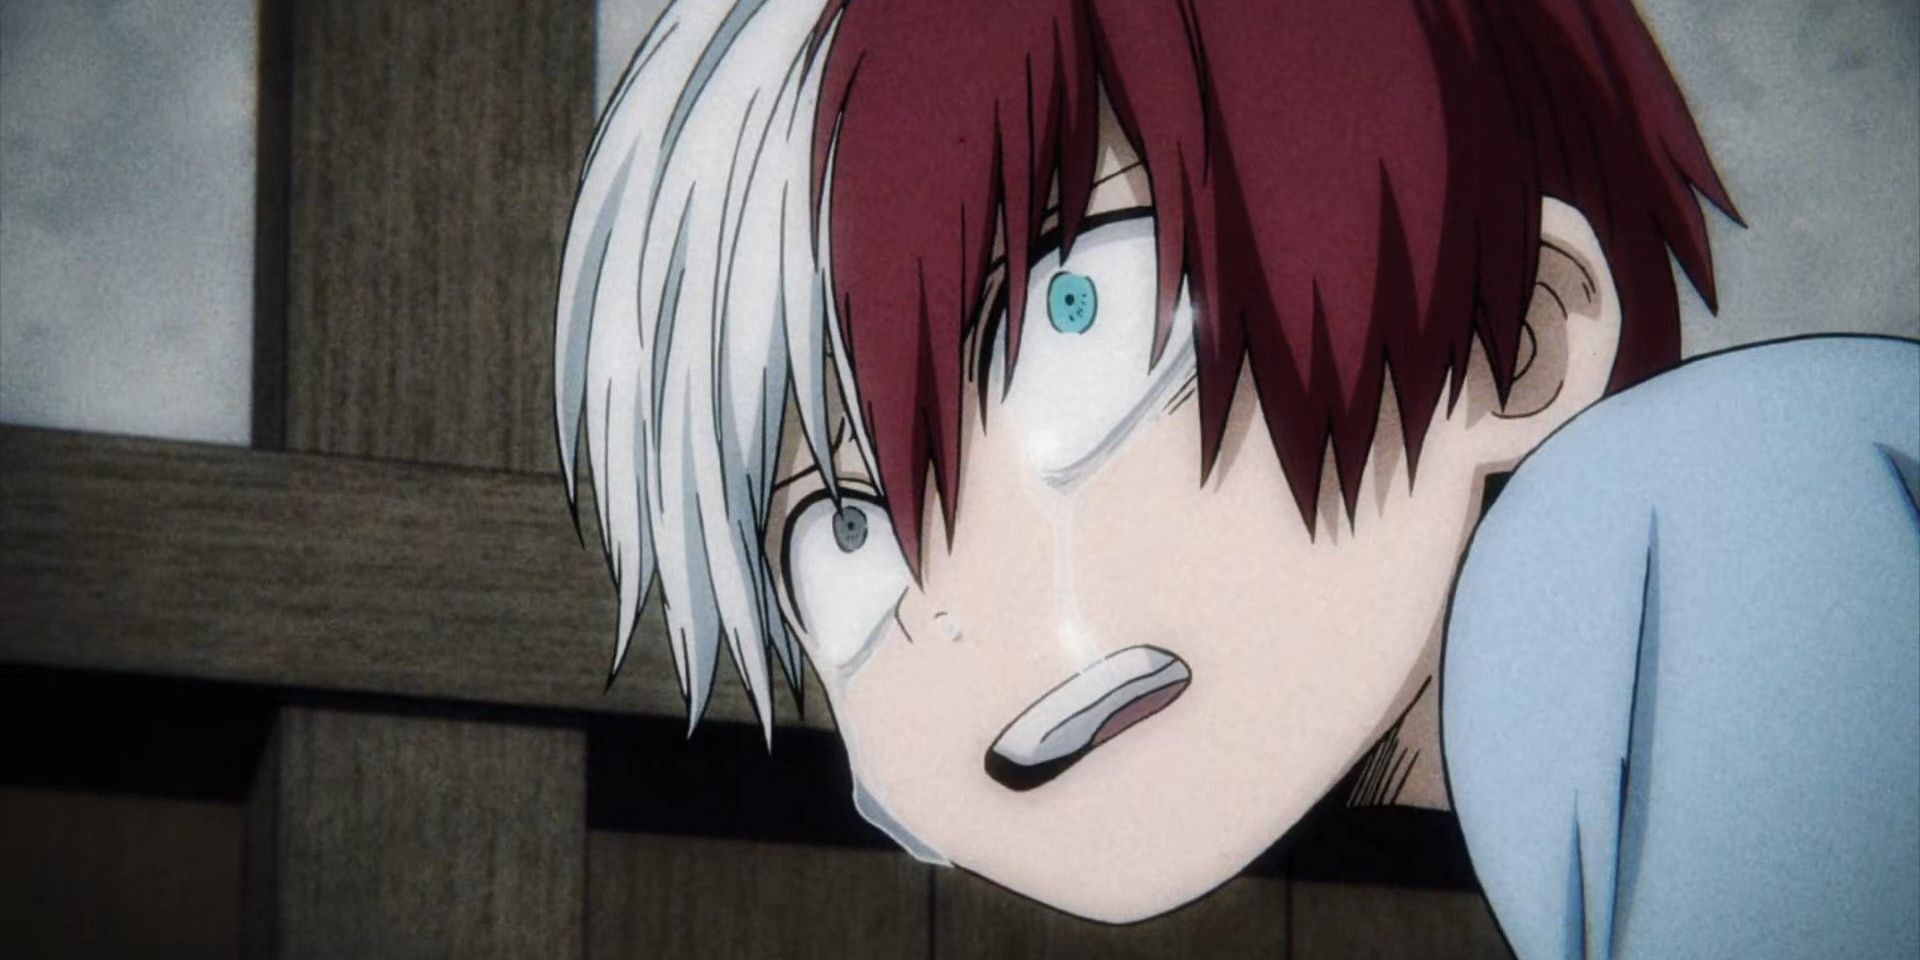 Young Todoroki from My Hero Academia looking up at someone crying and scared.